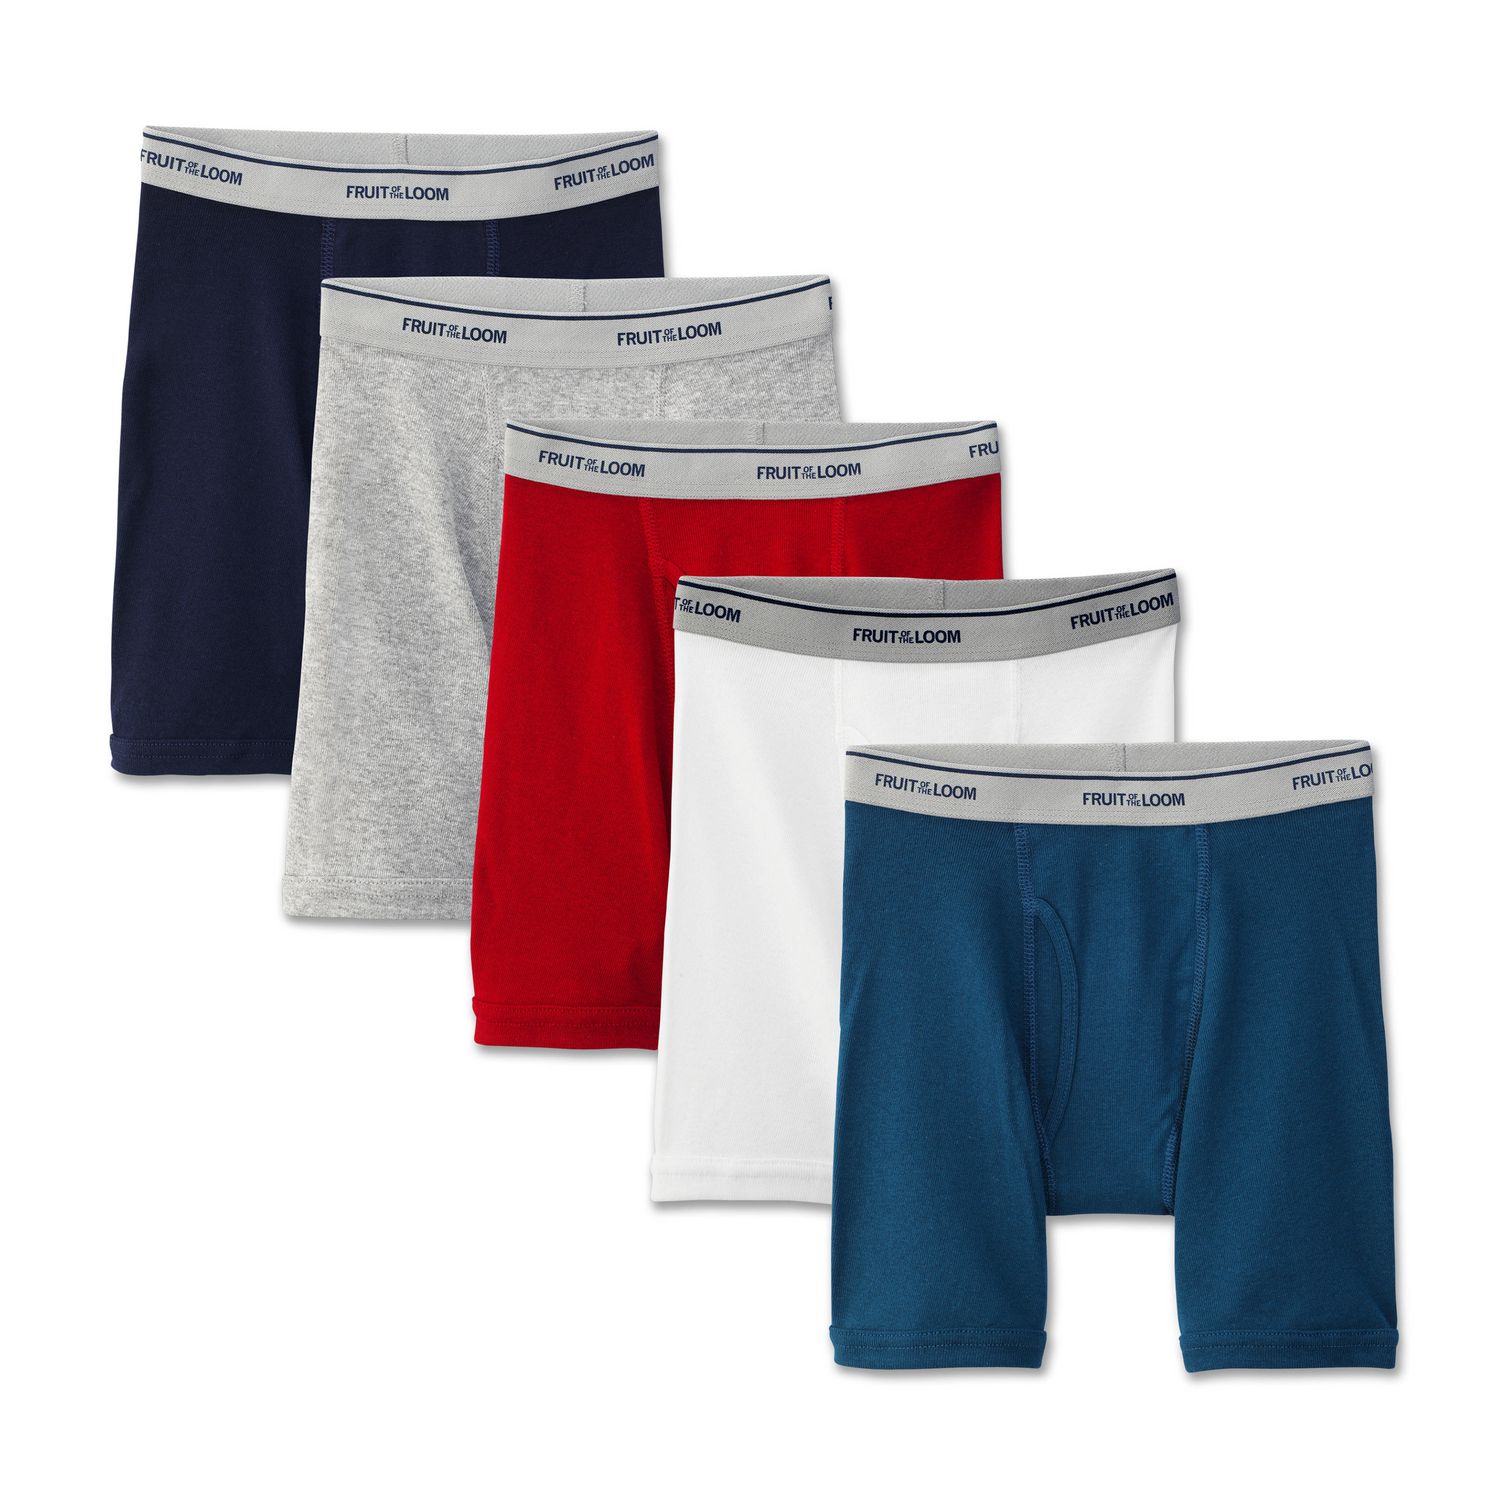 Fruit of the Loom Boys Boxer Briefs, 5-Pack 